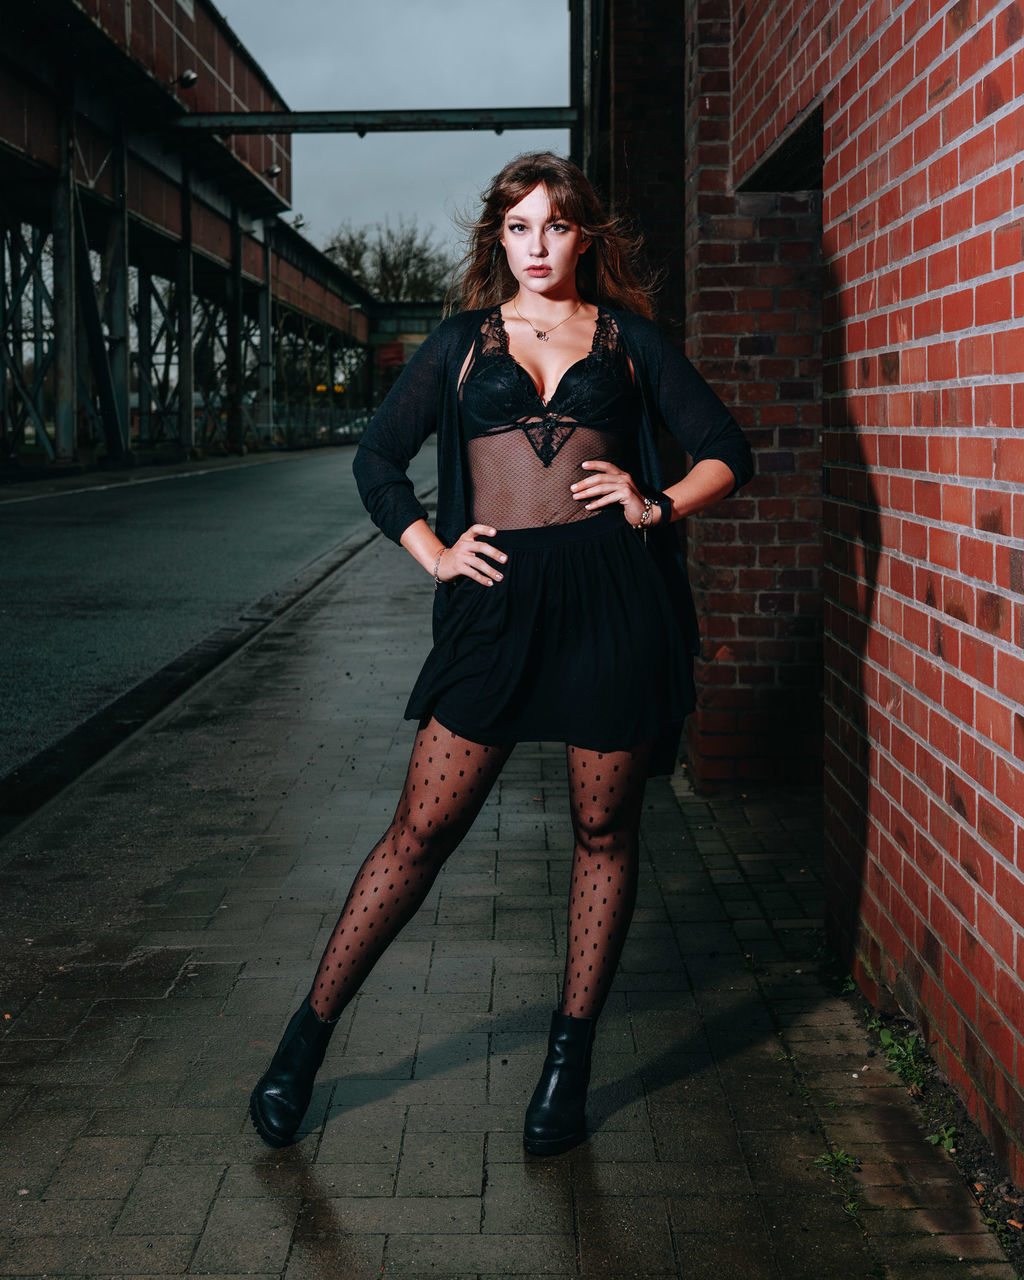 FULL LENGTH PORTRAIT OF WOMAN STANDING AGAINST BRICK WALL